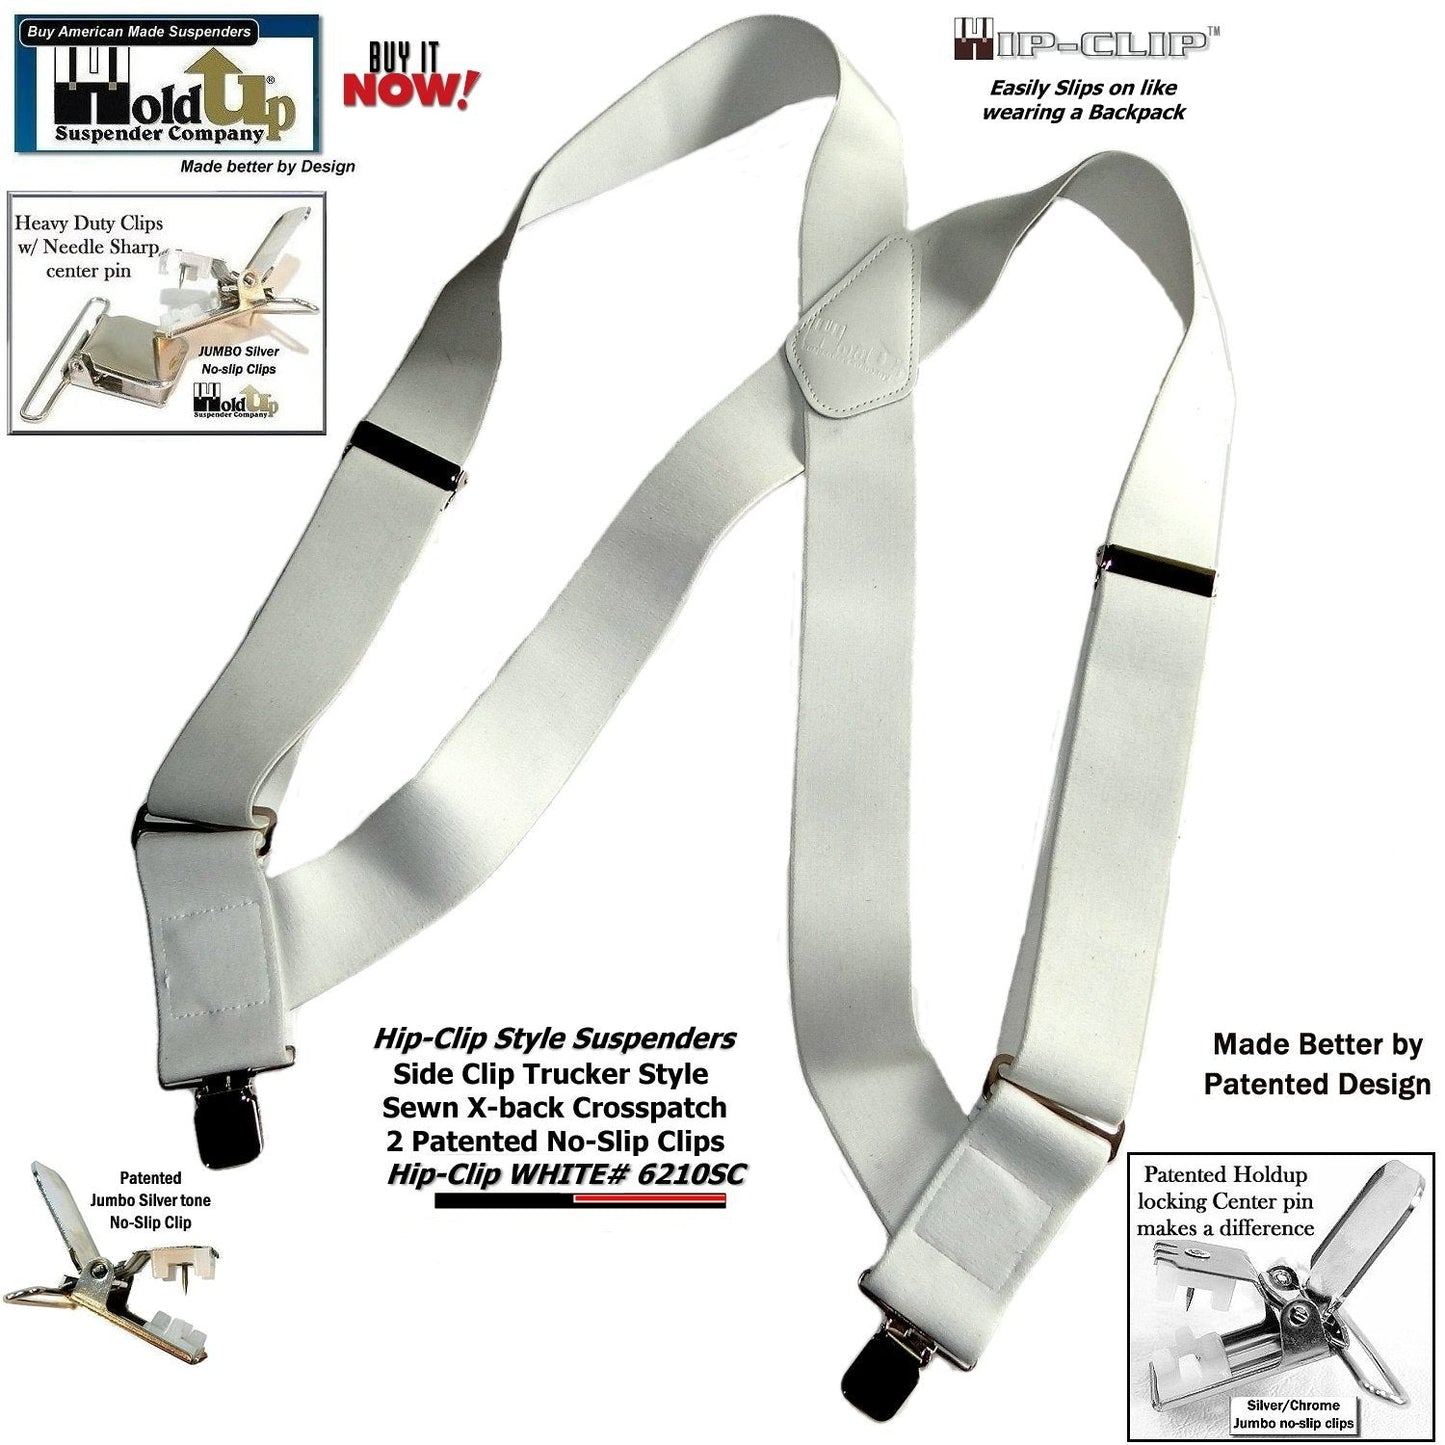 Holdup Brand All White 2" Wide Hip-Clip Suspenders with USA Patented Jumbo Silver No-slip Clips